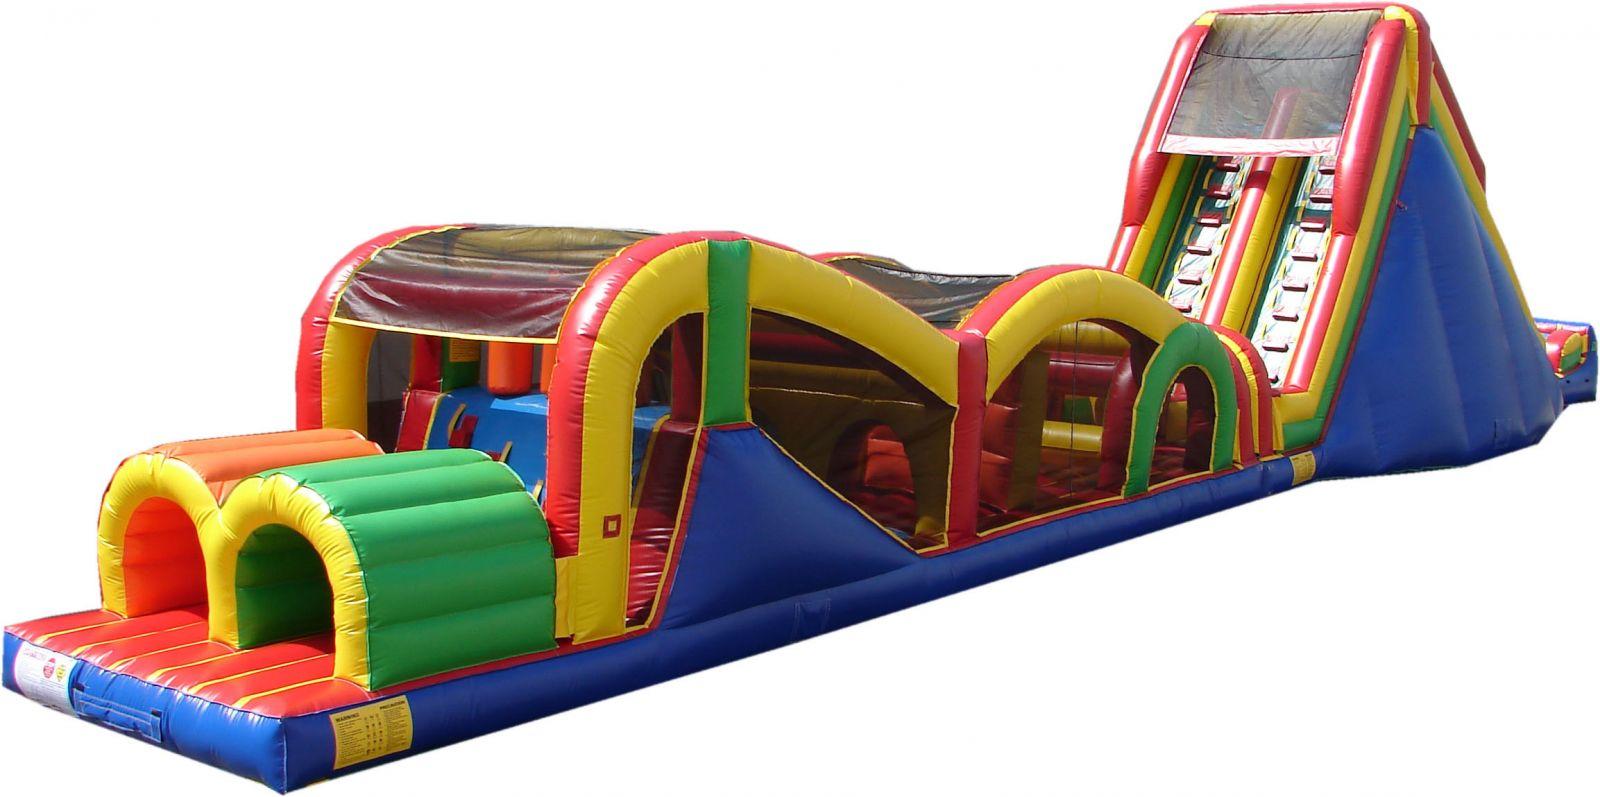 Inflatable Obstacle Course Rental in Riverside